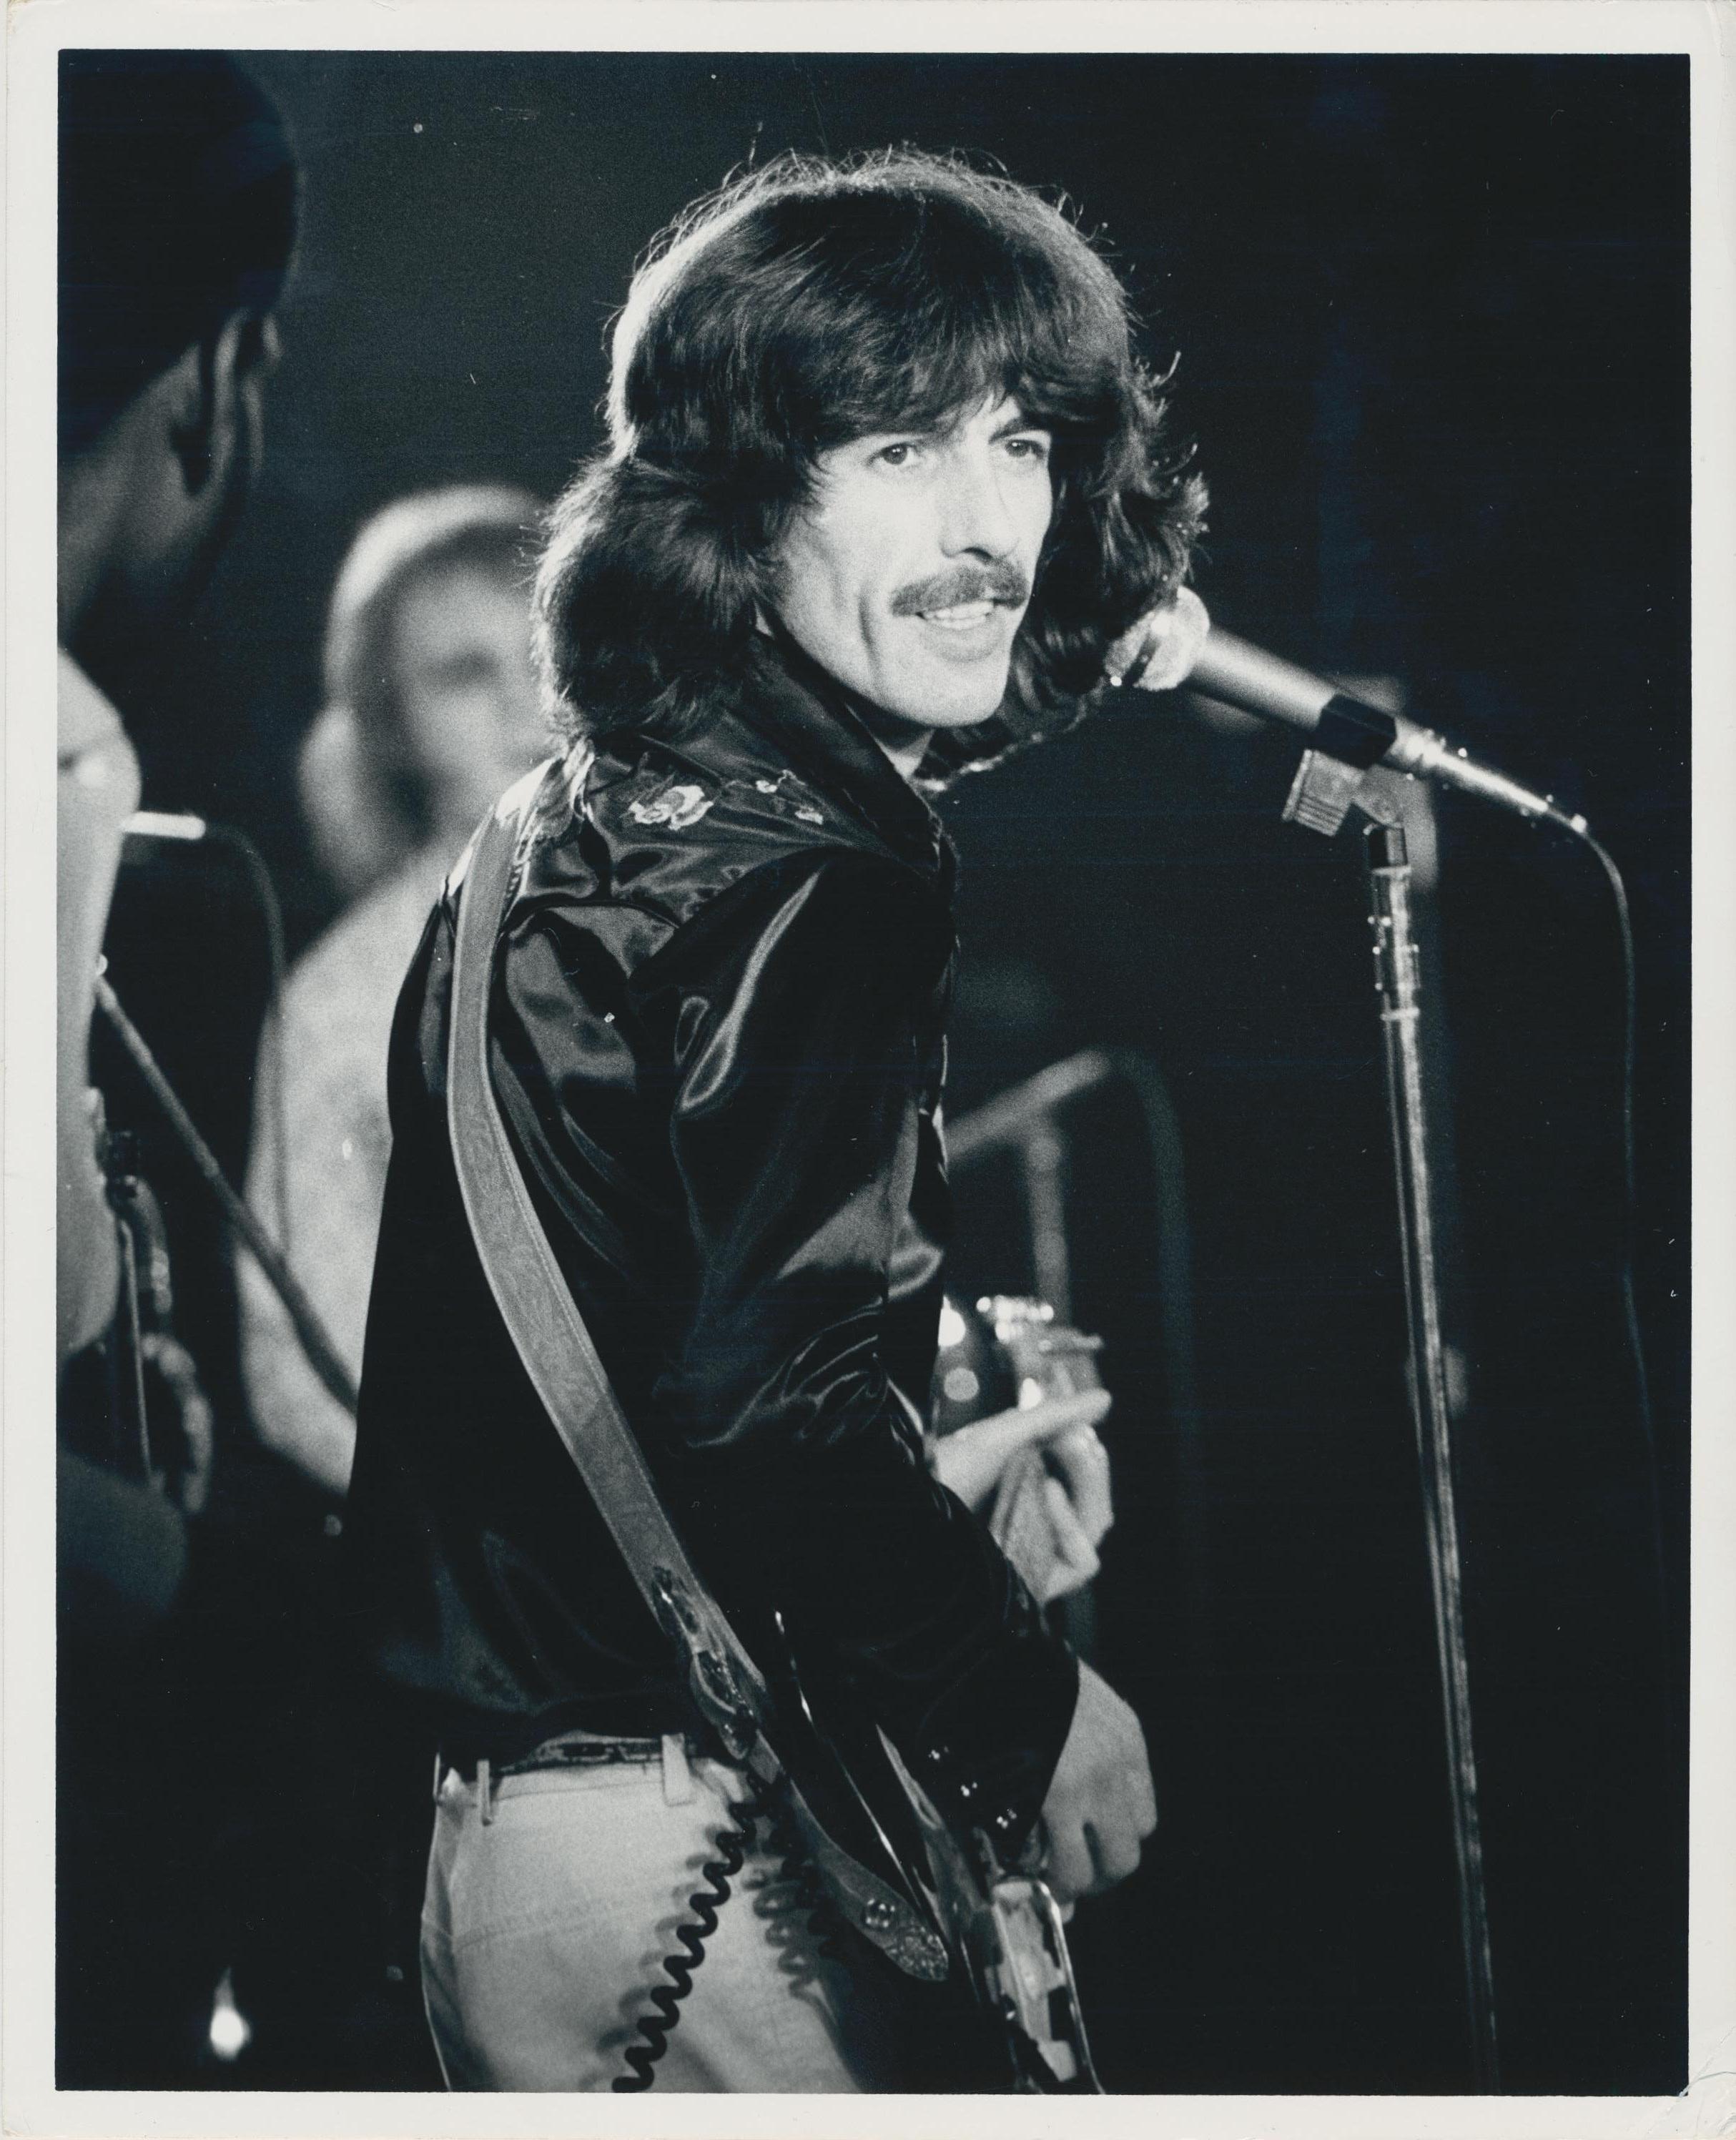 George Harrison on Stage, Black and White Photography, 25, 4 x 20, 6 cm